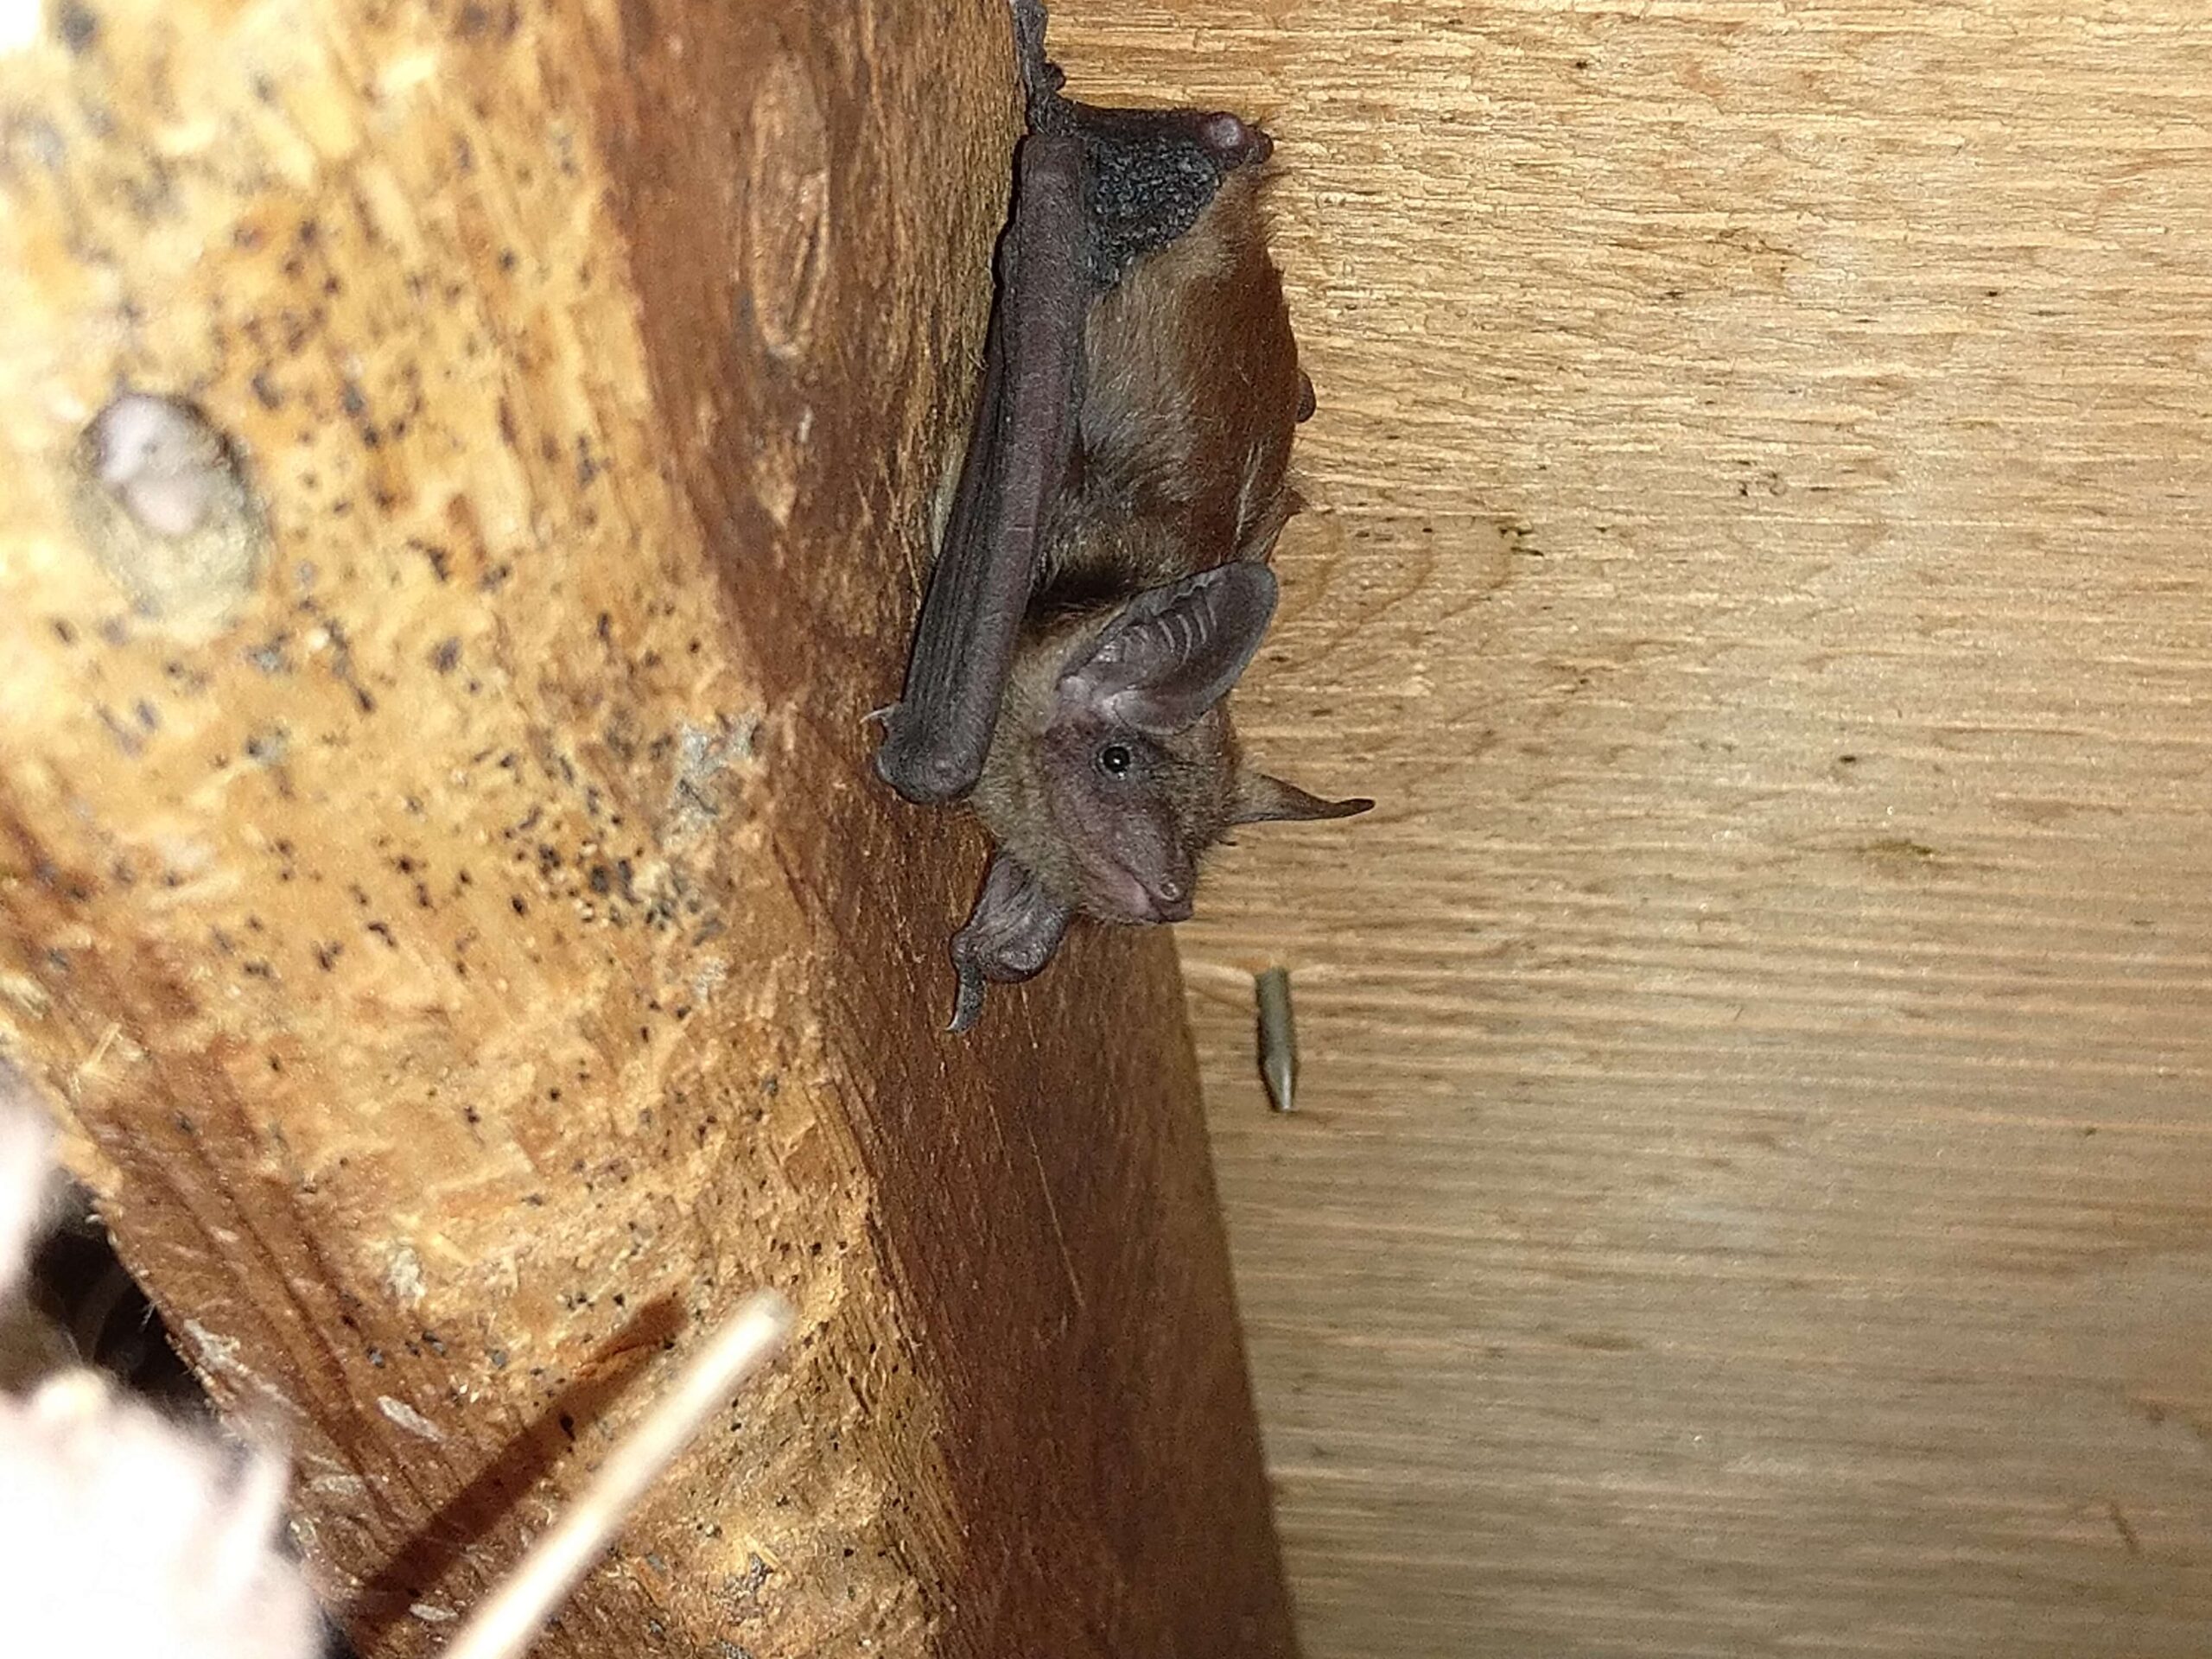 What Are Bats In Milwaukee Up To This Spring?